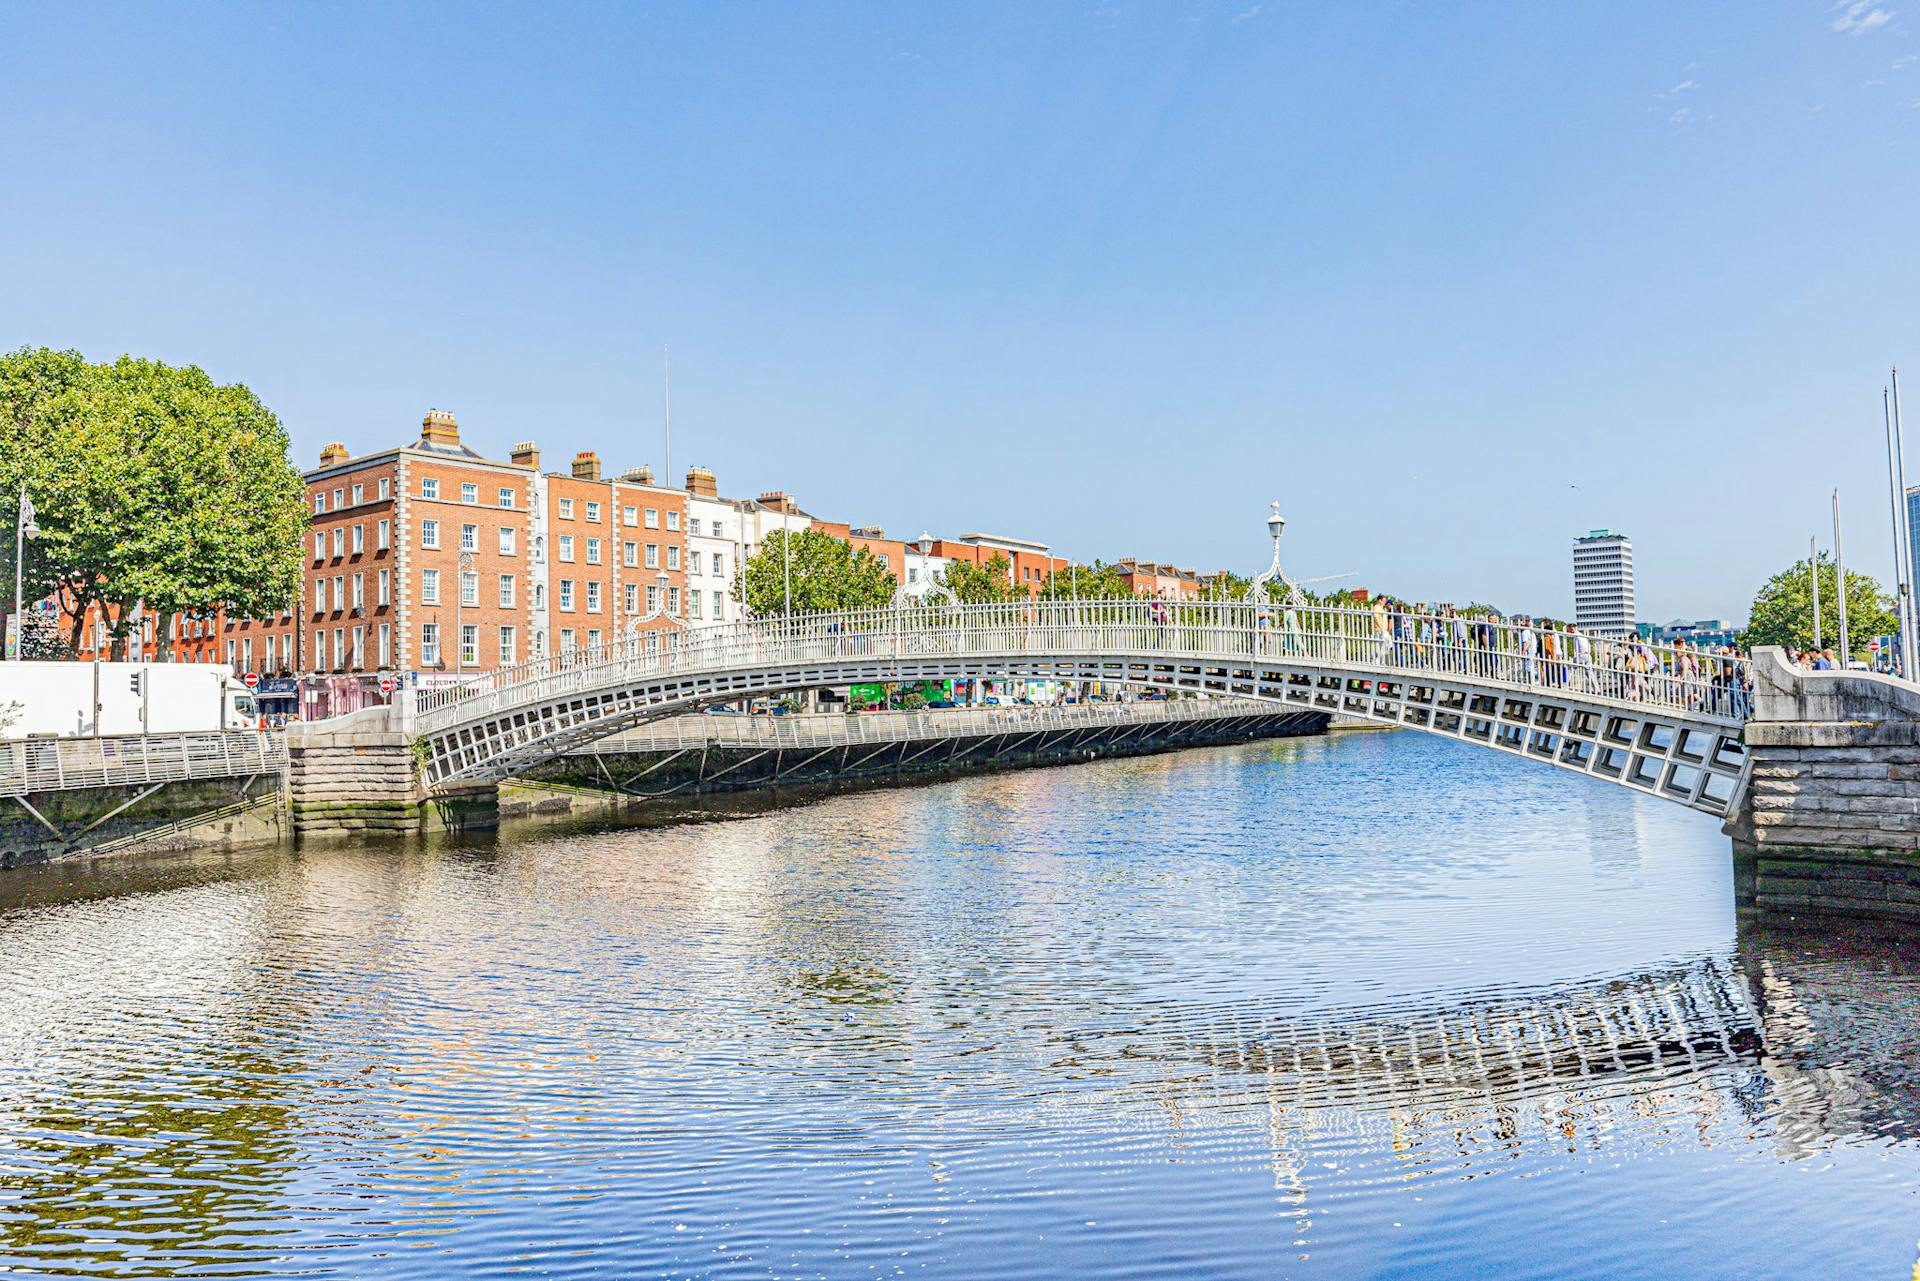 <p>The Penny Bridge, also known as the Ha’penny Bridge or the Liffey Bridge, is a famous pedestrian bridge in Dublin, Ireland. It crosses the River Liffey and connects Ormond Quay Lower to Wellington Quay. </p><p><br></p><p>It was built in 1816 from cast iron and was originally named after the Duke of Wellington, who was born in Dublin. The bridge got its nickname from the ha’penny toll that was charged to cross it until 1919. Today, the bridge is a popular landmark and a symbol of the city.</p><p><br></p>